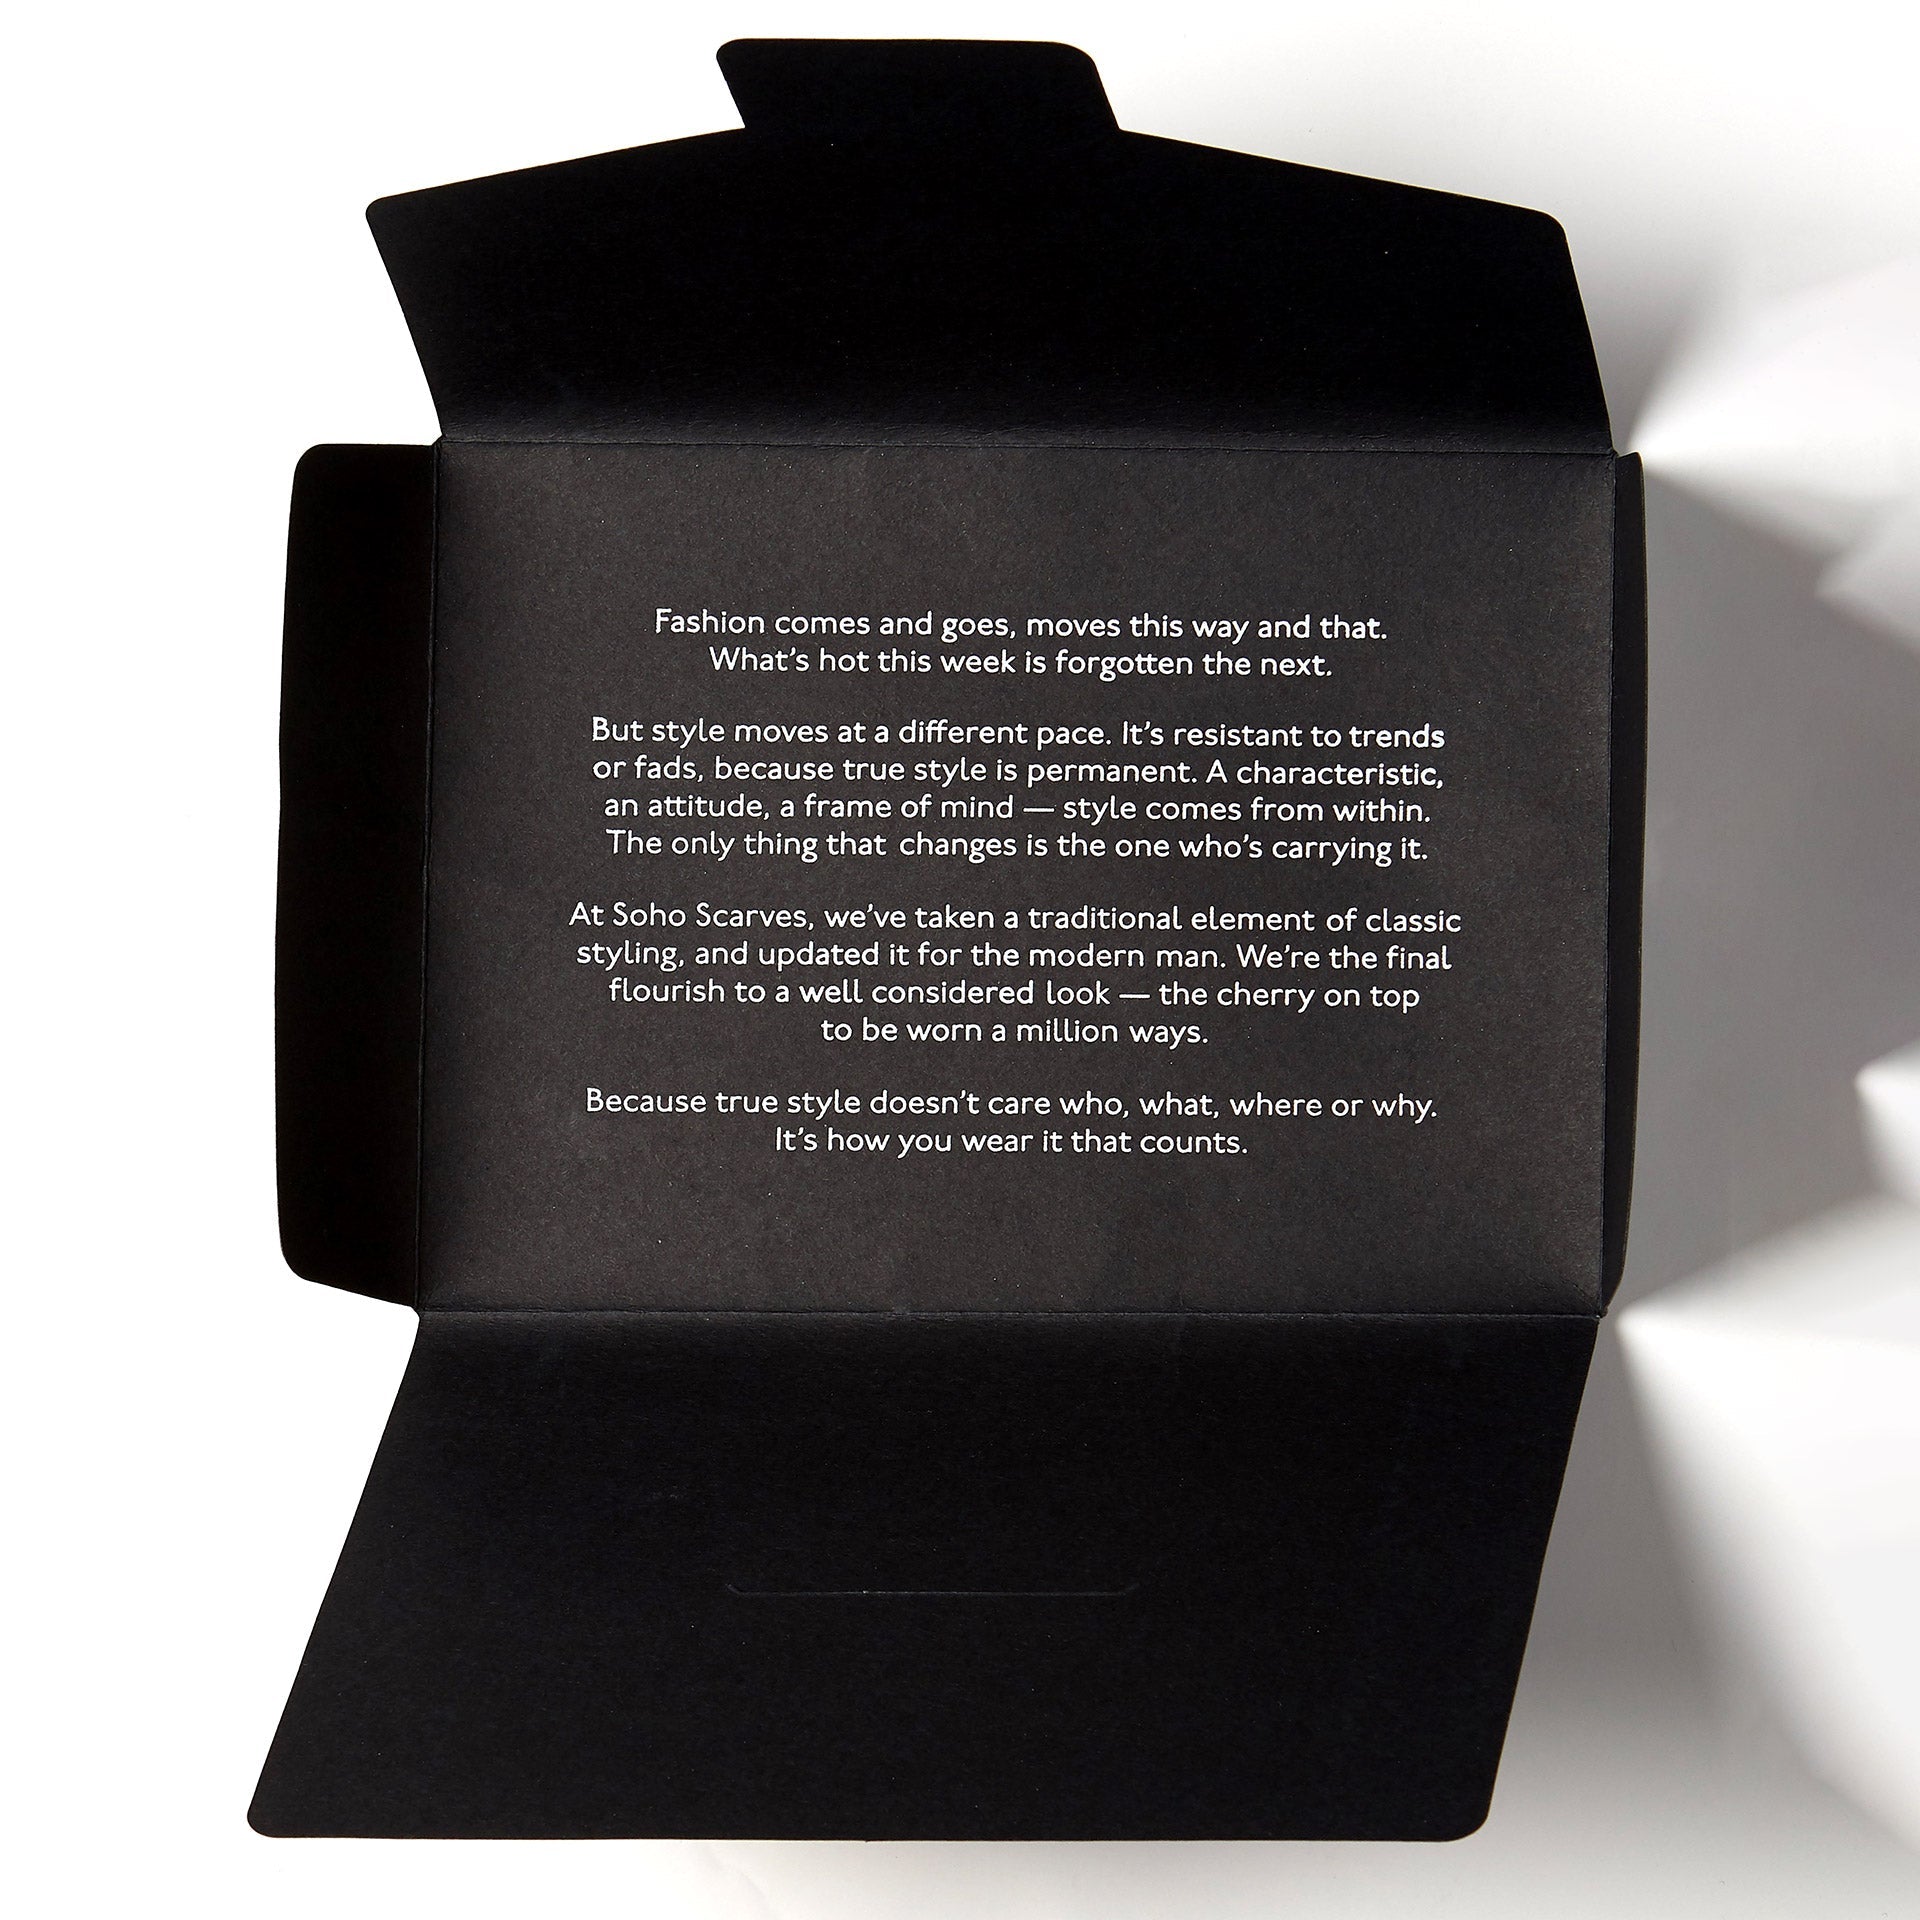 Opened black packaging for silk scarf from Soho Scarves, containing style manifesto.